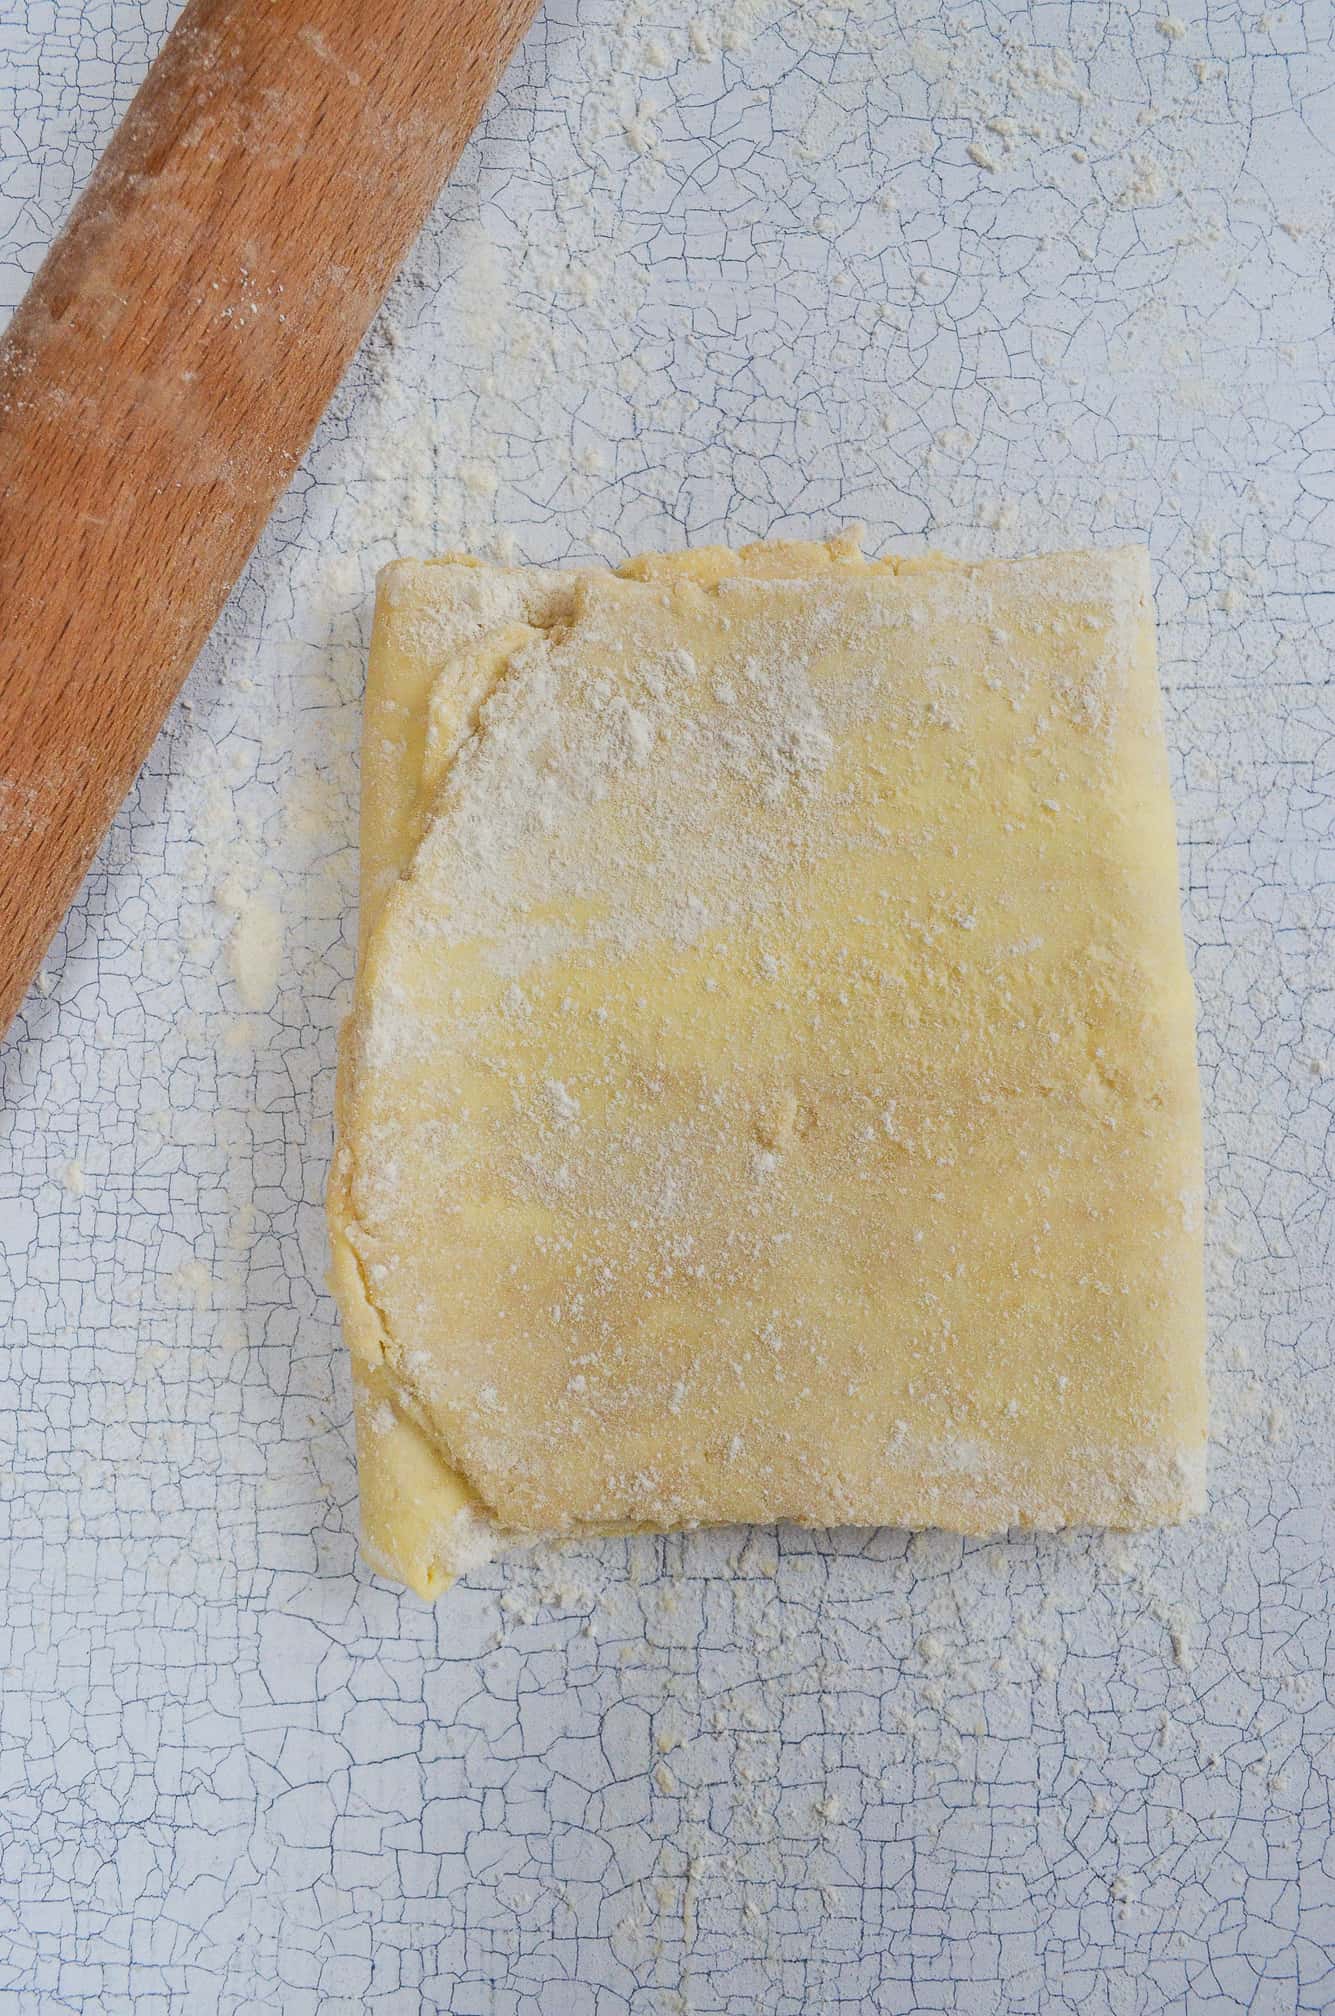 rough puff pastry process